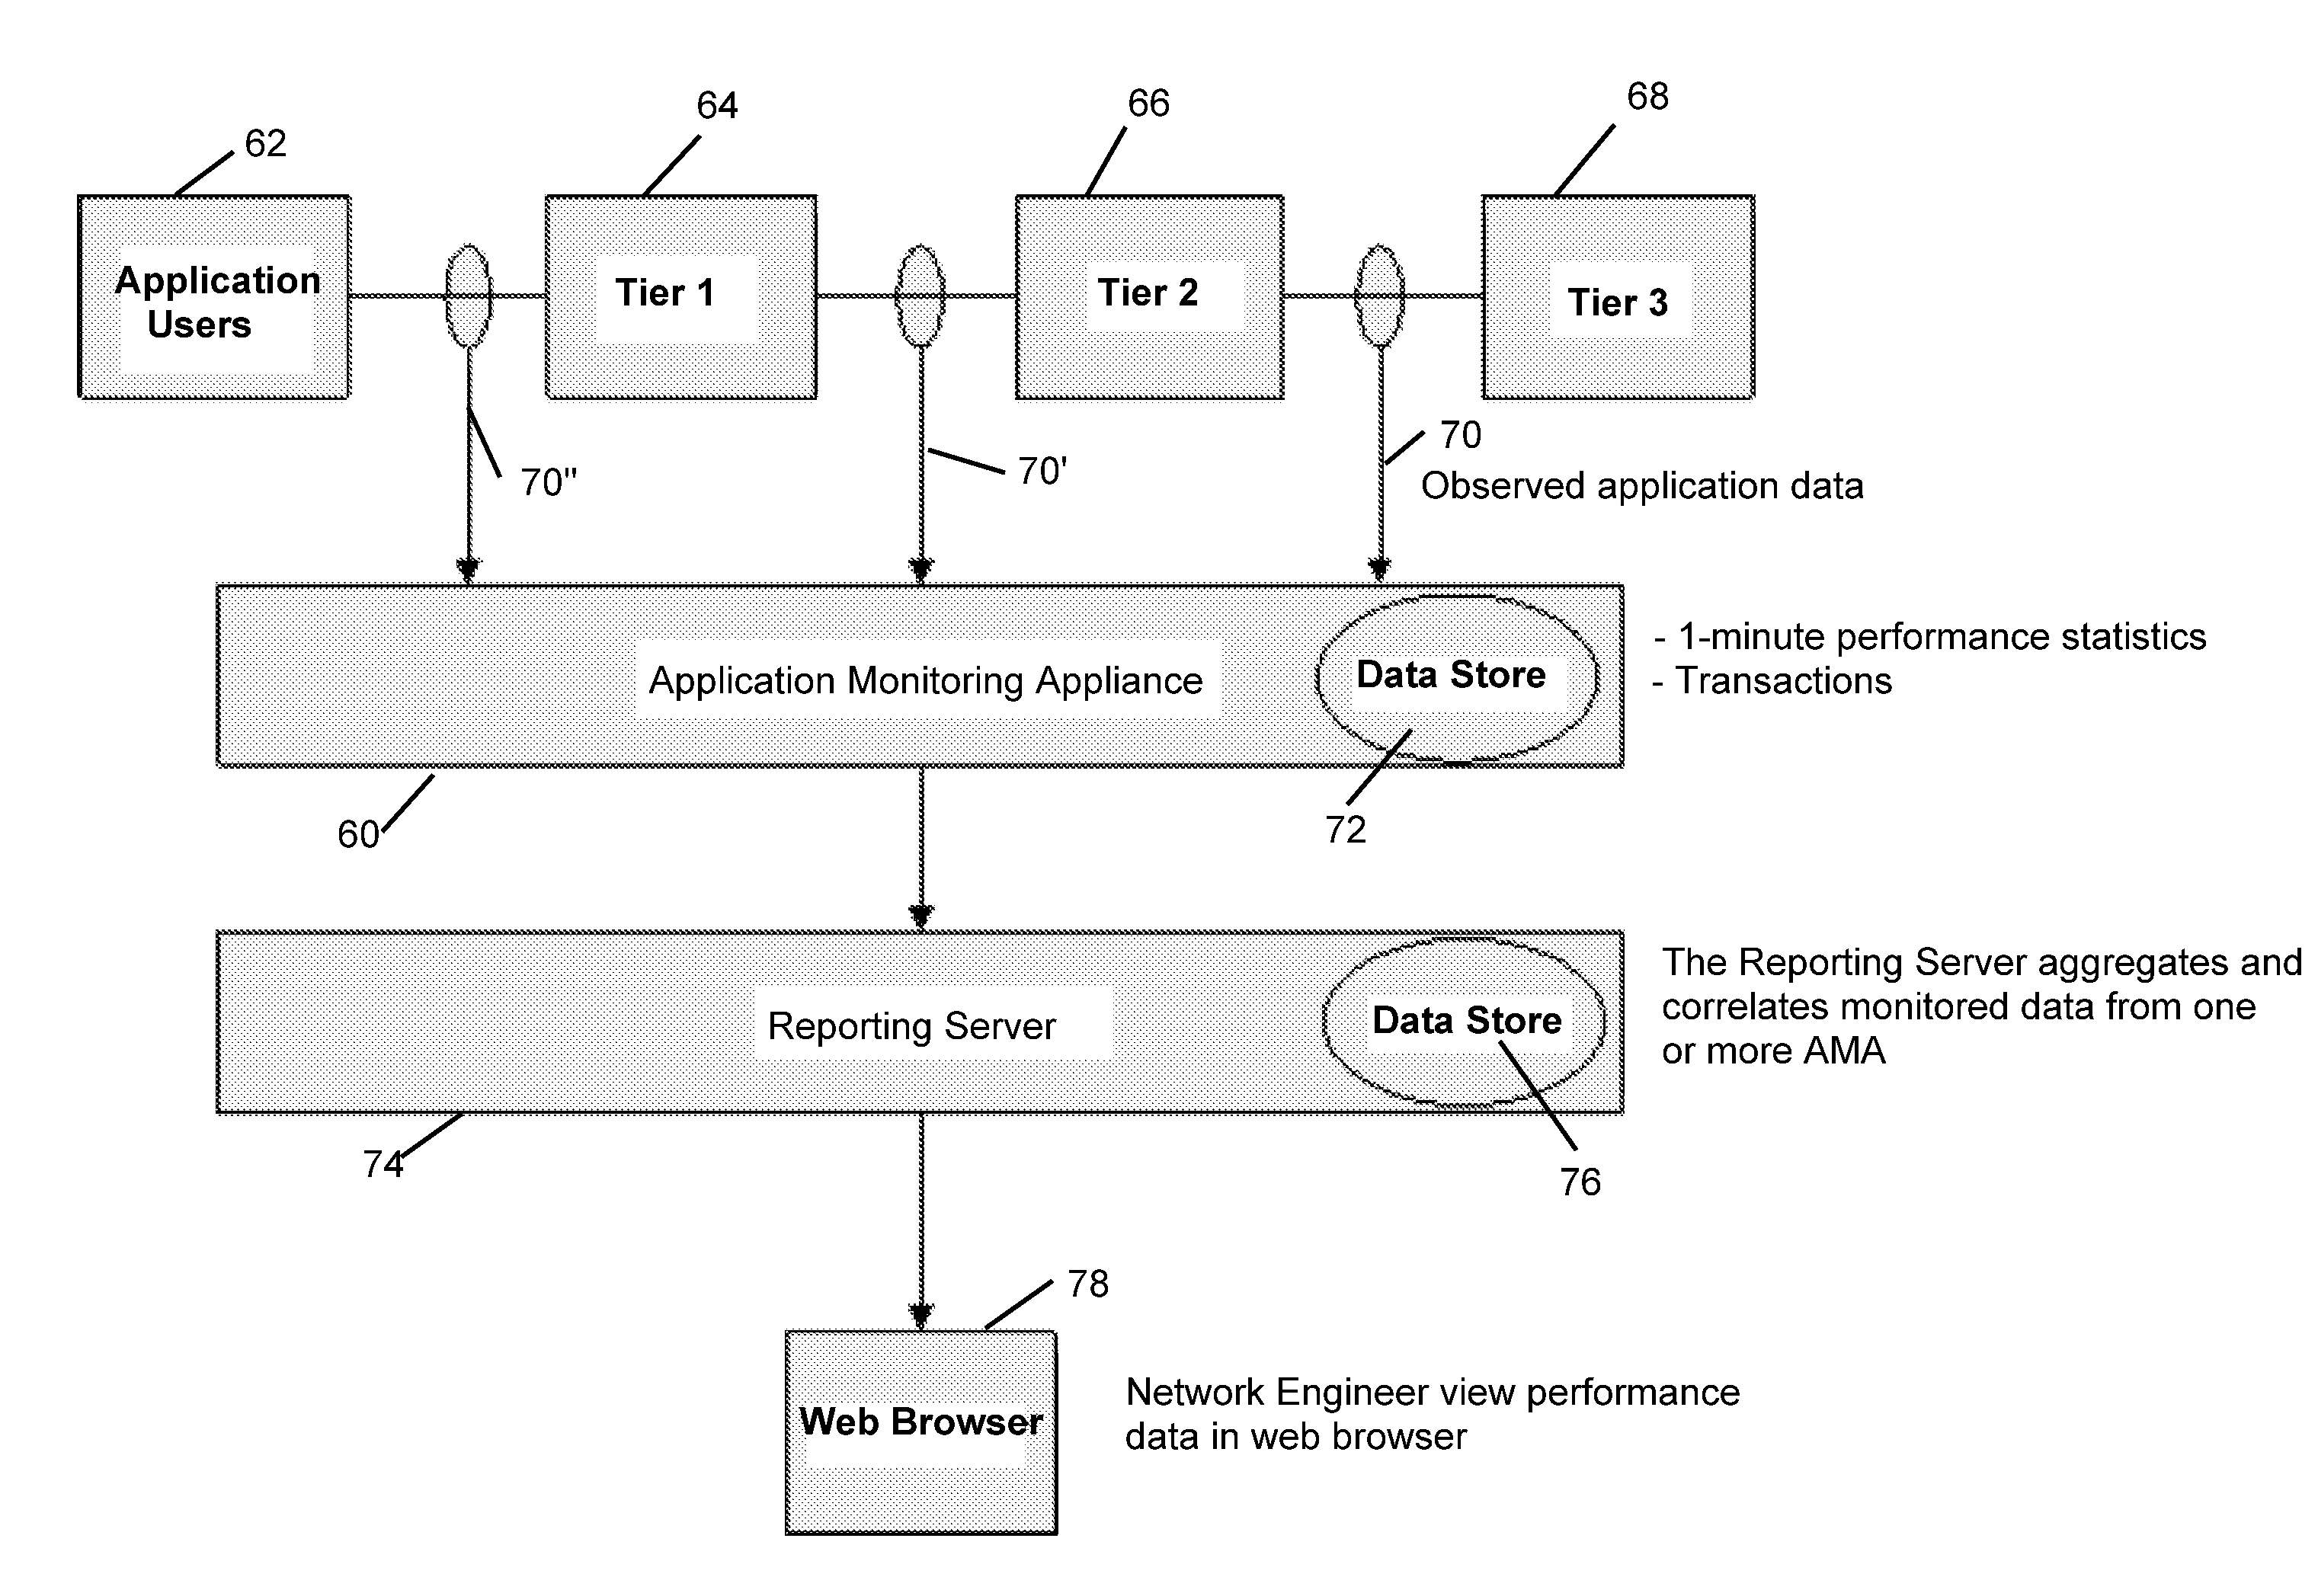 Method and apparatus for the continuous collection and correlation of application transactions across all tiers of an n-tier application